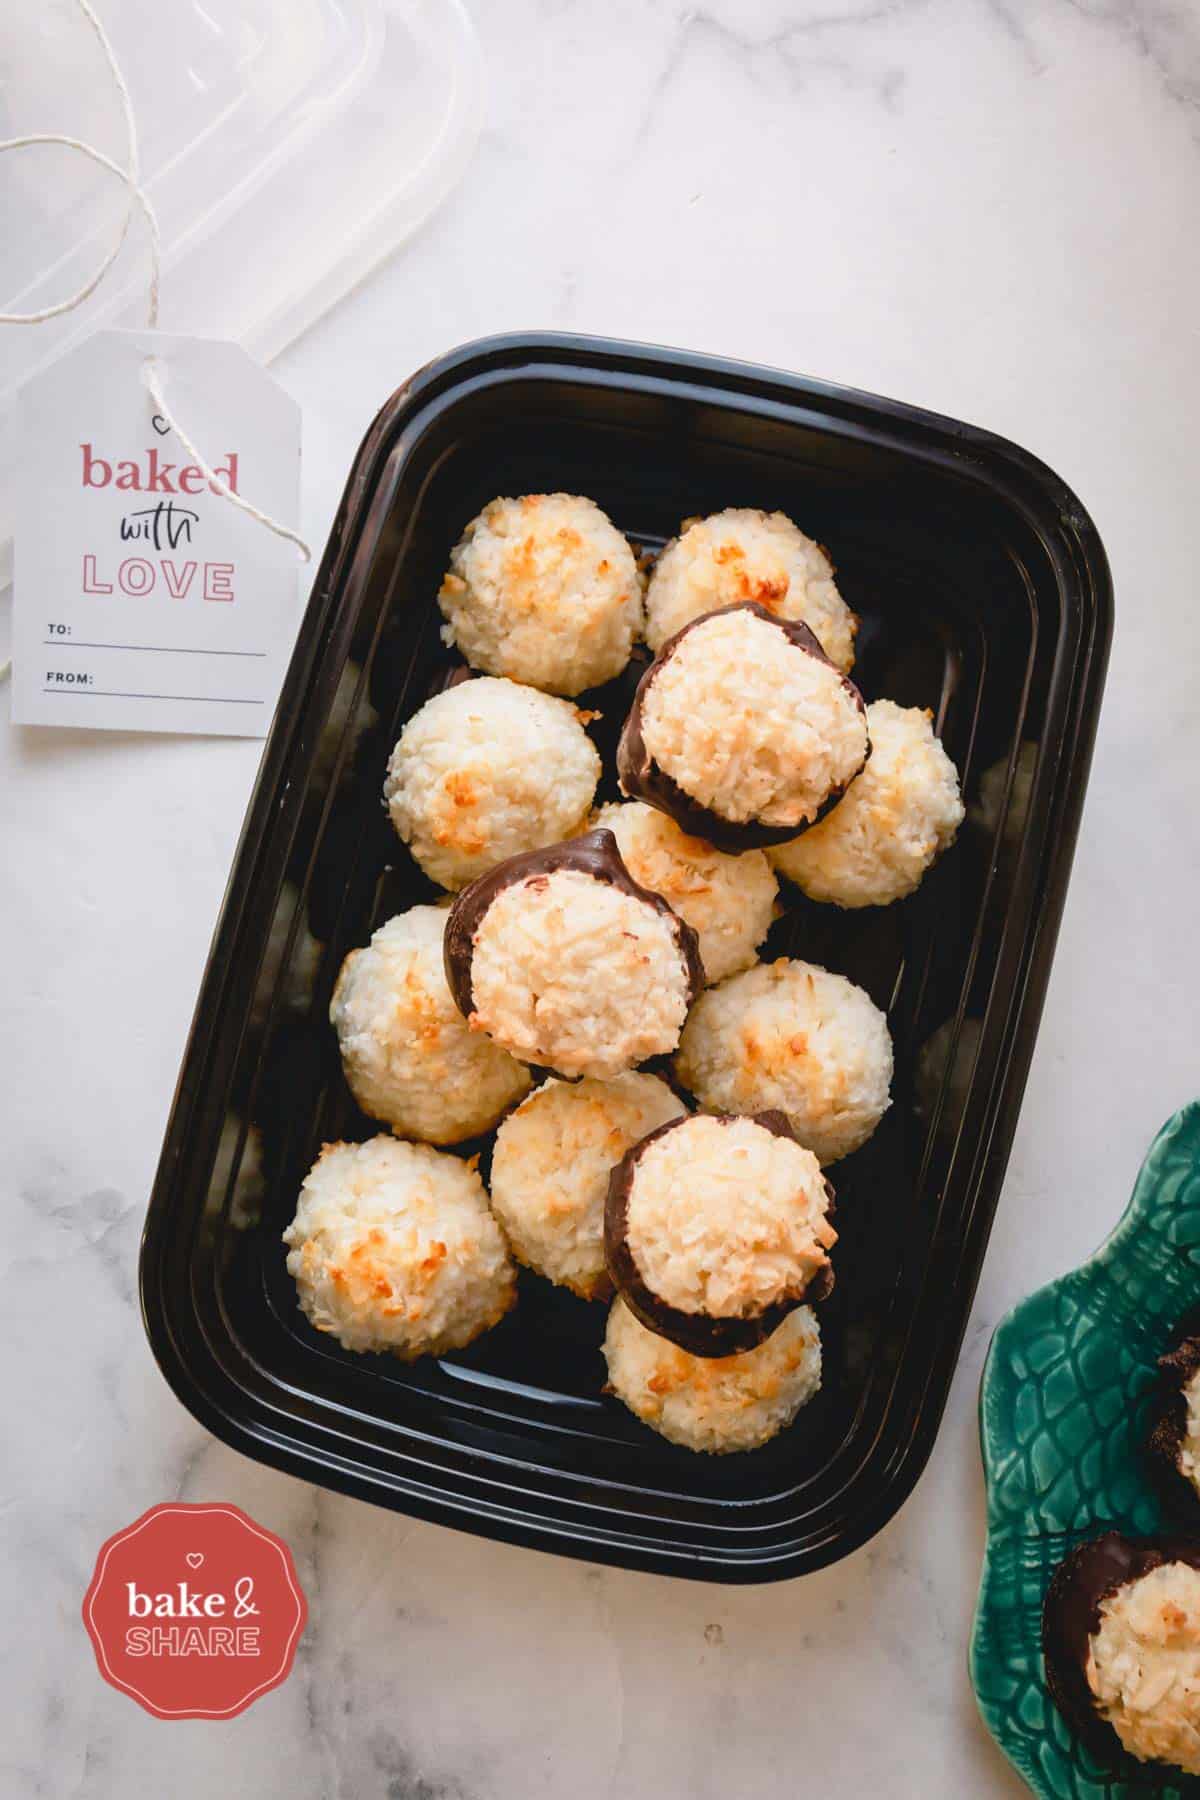 Coconut macaroons in a plastic container.